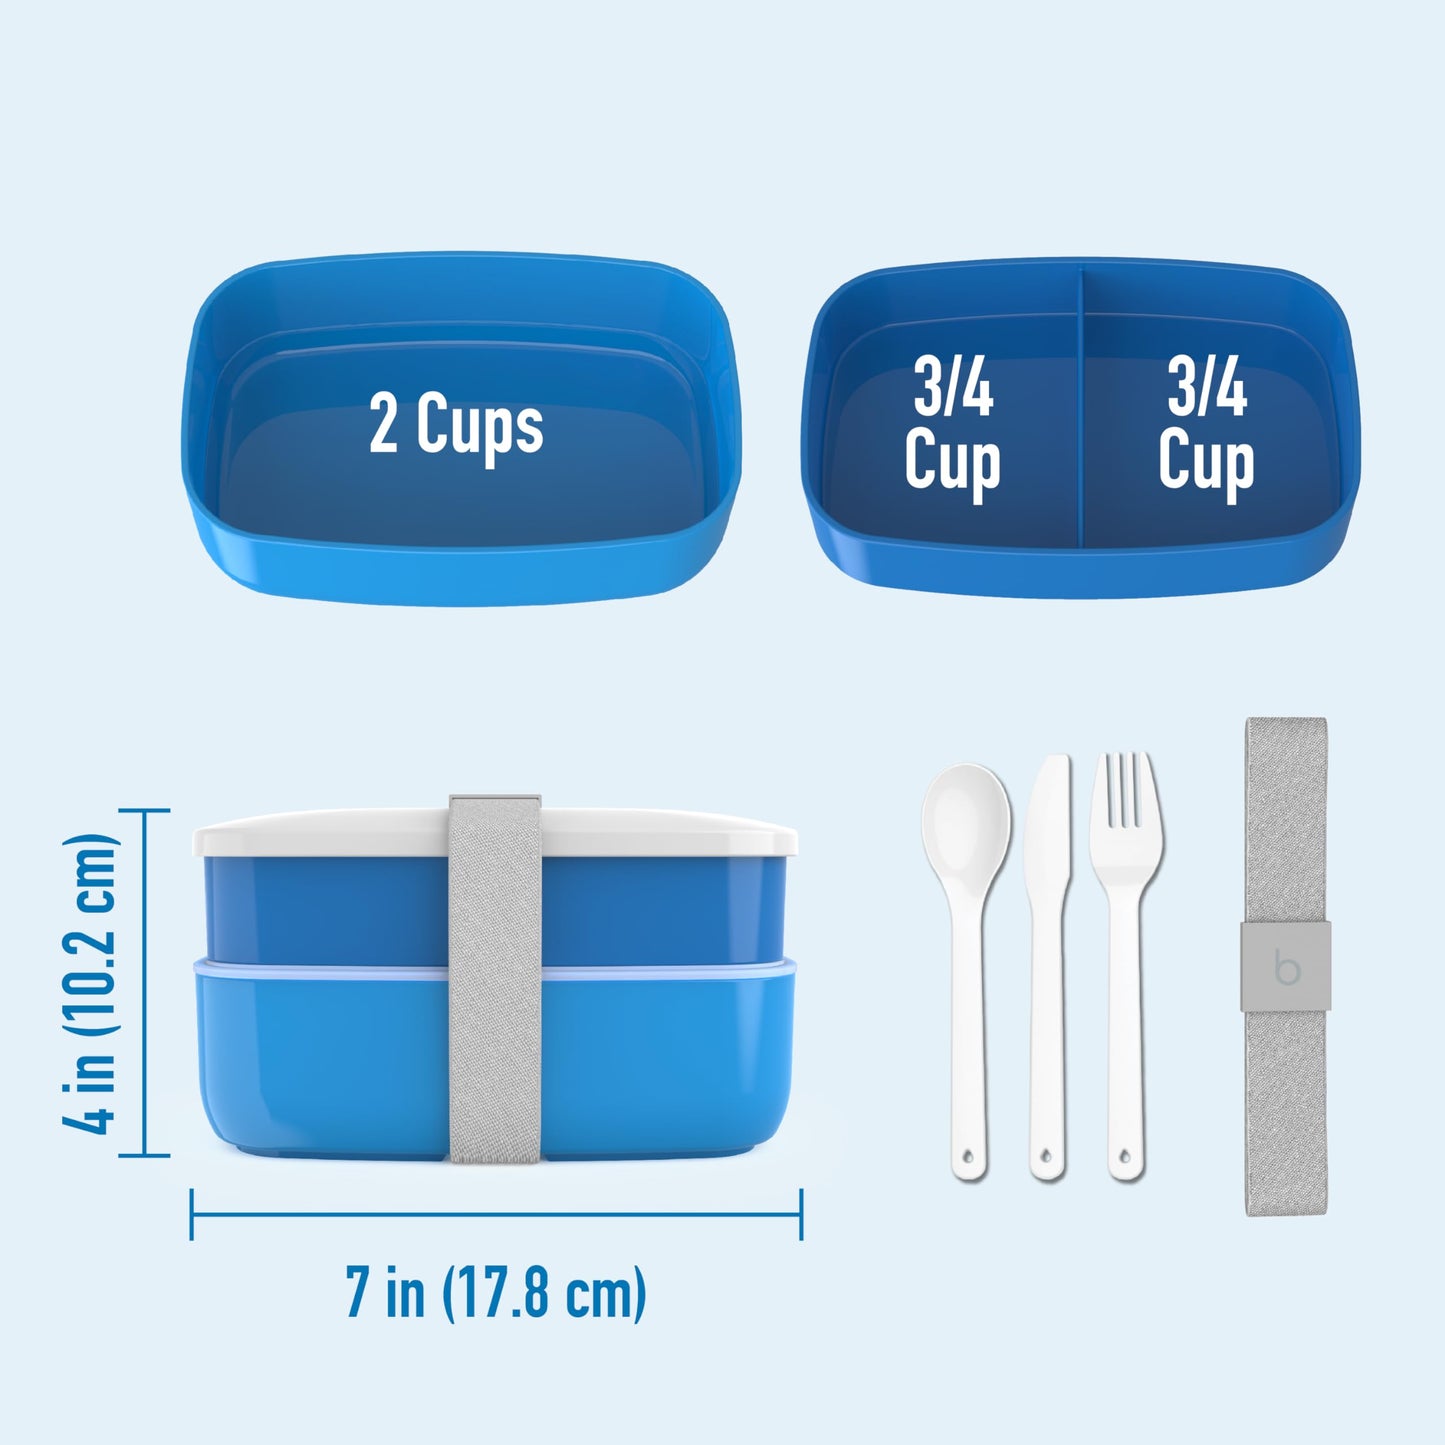 Bentgo® Classic - Adult Bento Box, All-in-One Stackable Lunch Box Container with 3 Compartments, Plastic Utensils, and Nylon Sealing Strap, BPA Free Food Container (Blue)